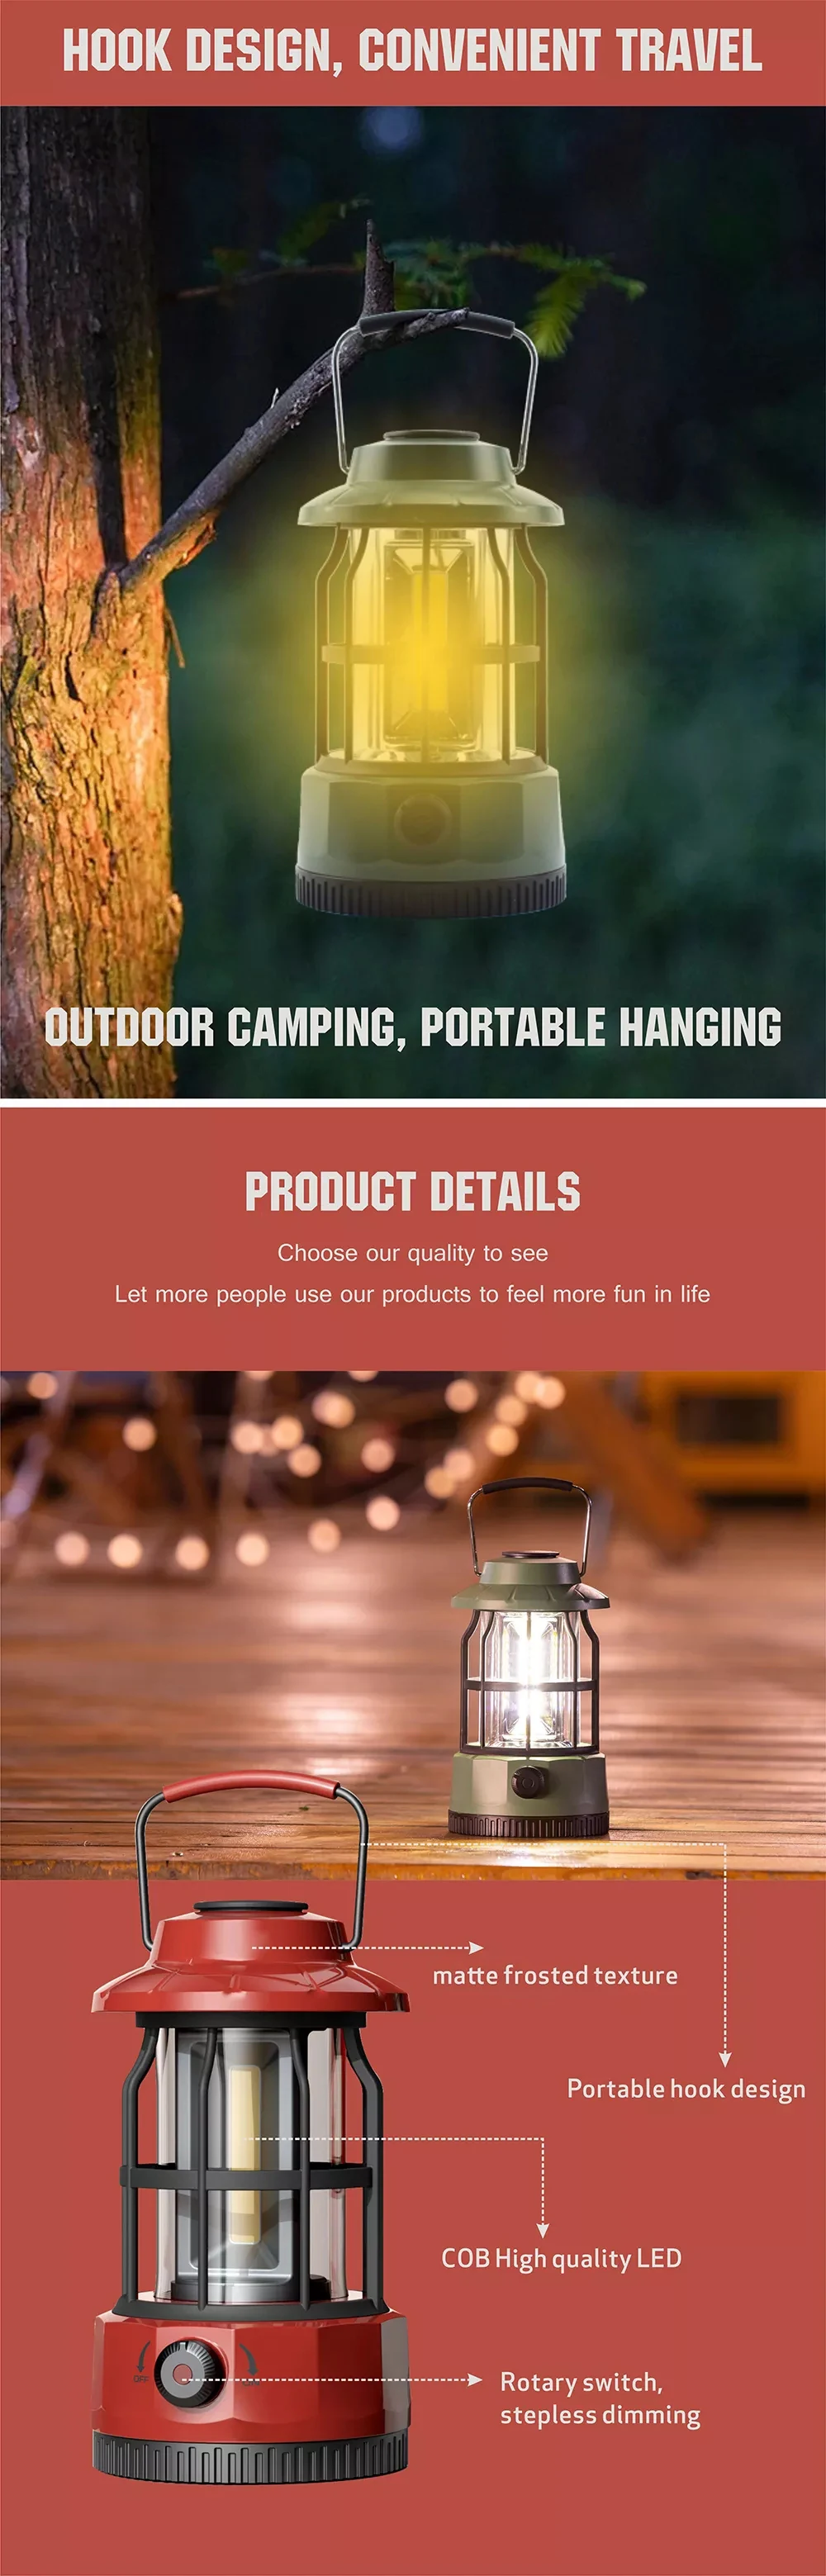 Portable Camp Tent Rechargeable Battery Cob Led Retro Camping Light ...